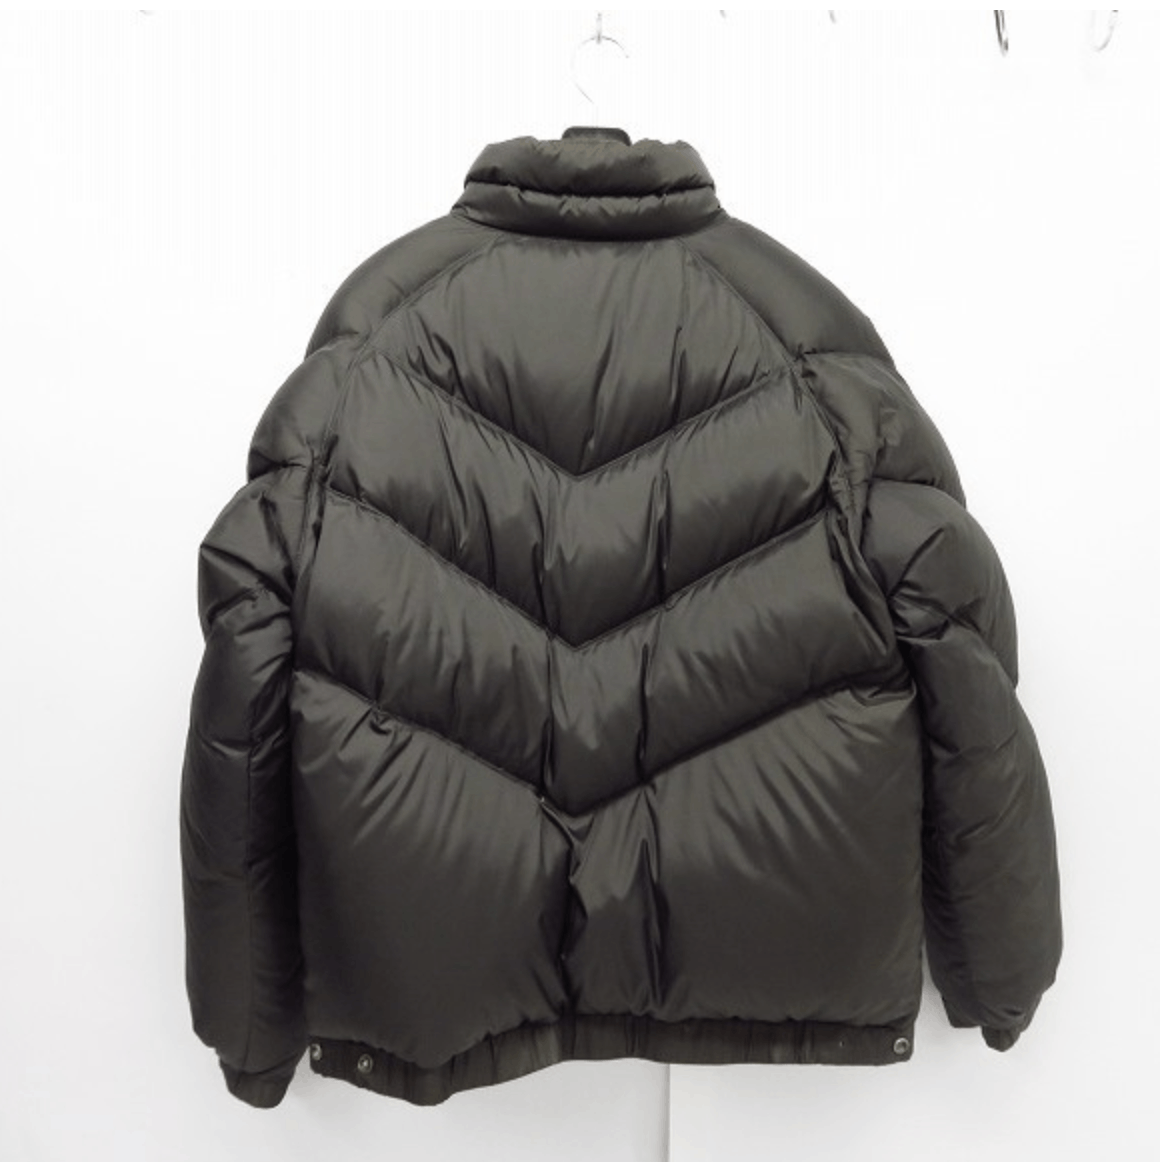 Stussy Stussy Puffer Jacket Size US M / EU 48-50 / 2 - 2 Preview